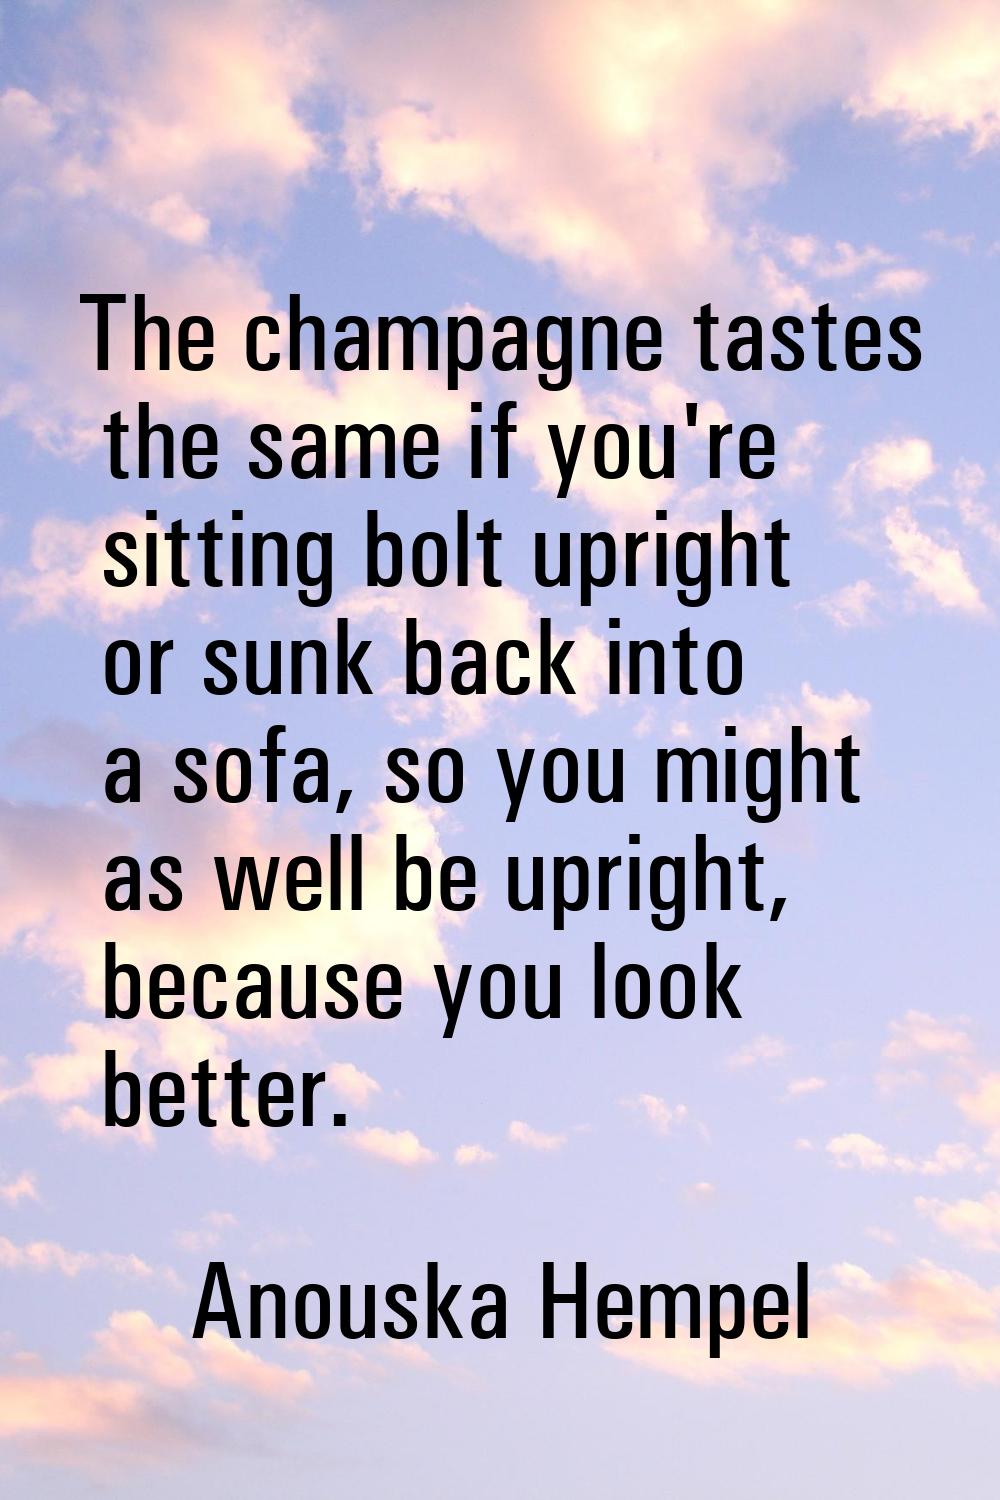 The champagne tastes the same if you're sitting bolt upright or sunk back into a sofa, so you might